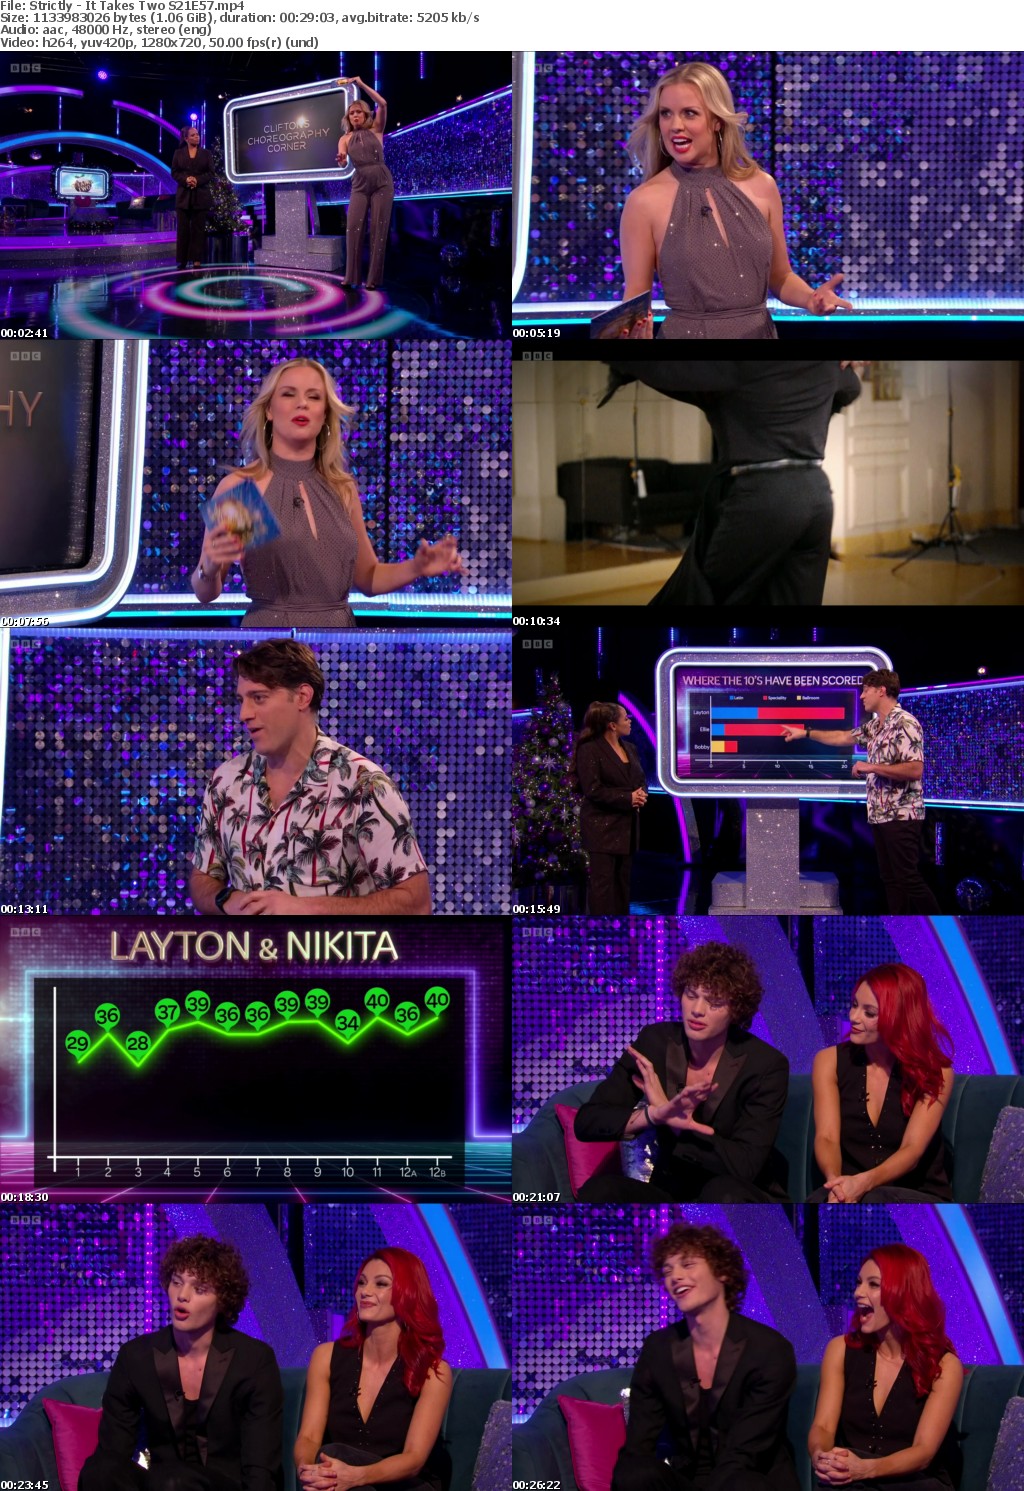 Strictly - It Takes Two S21E57 (1280x720p HD, 50fps, soft Eng subs)